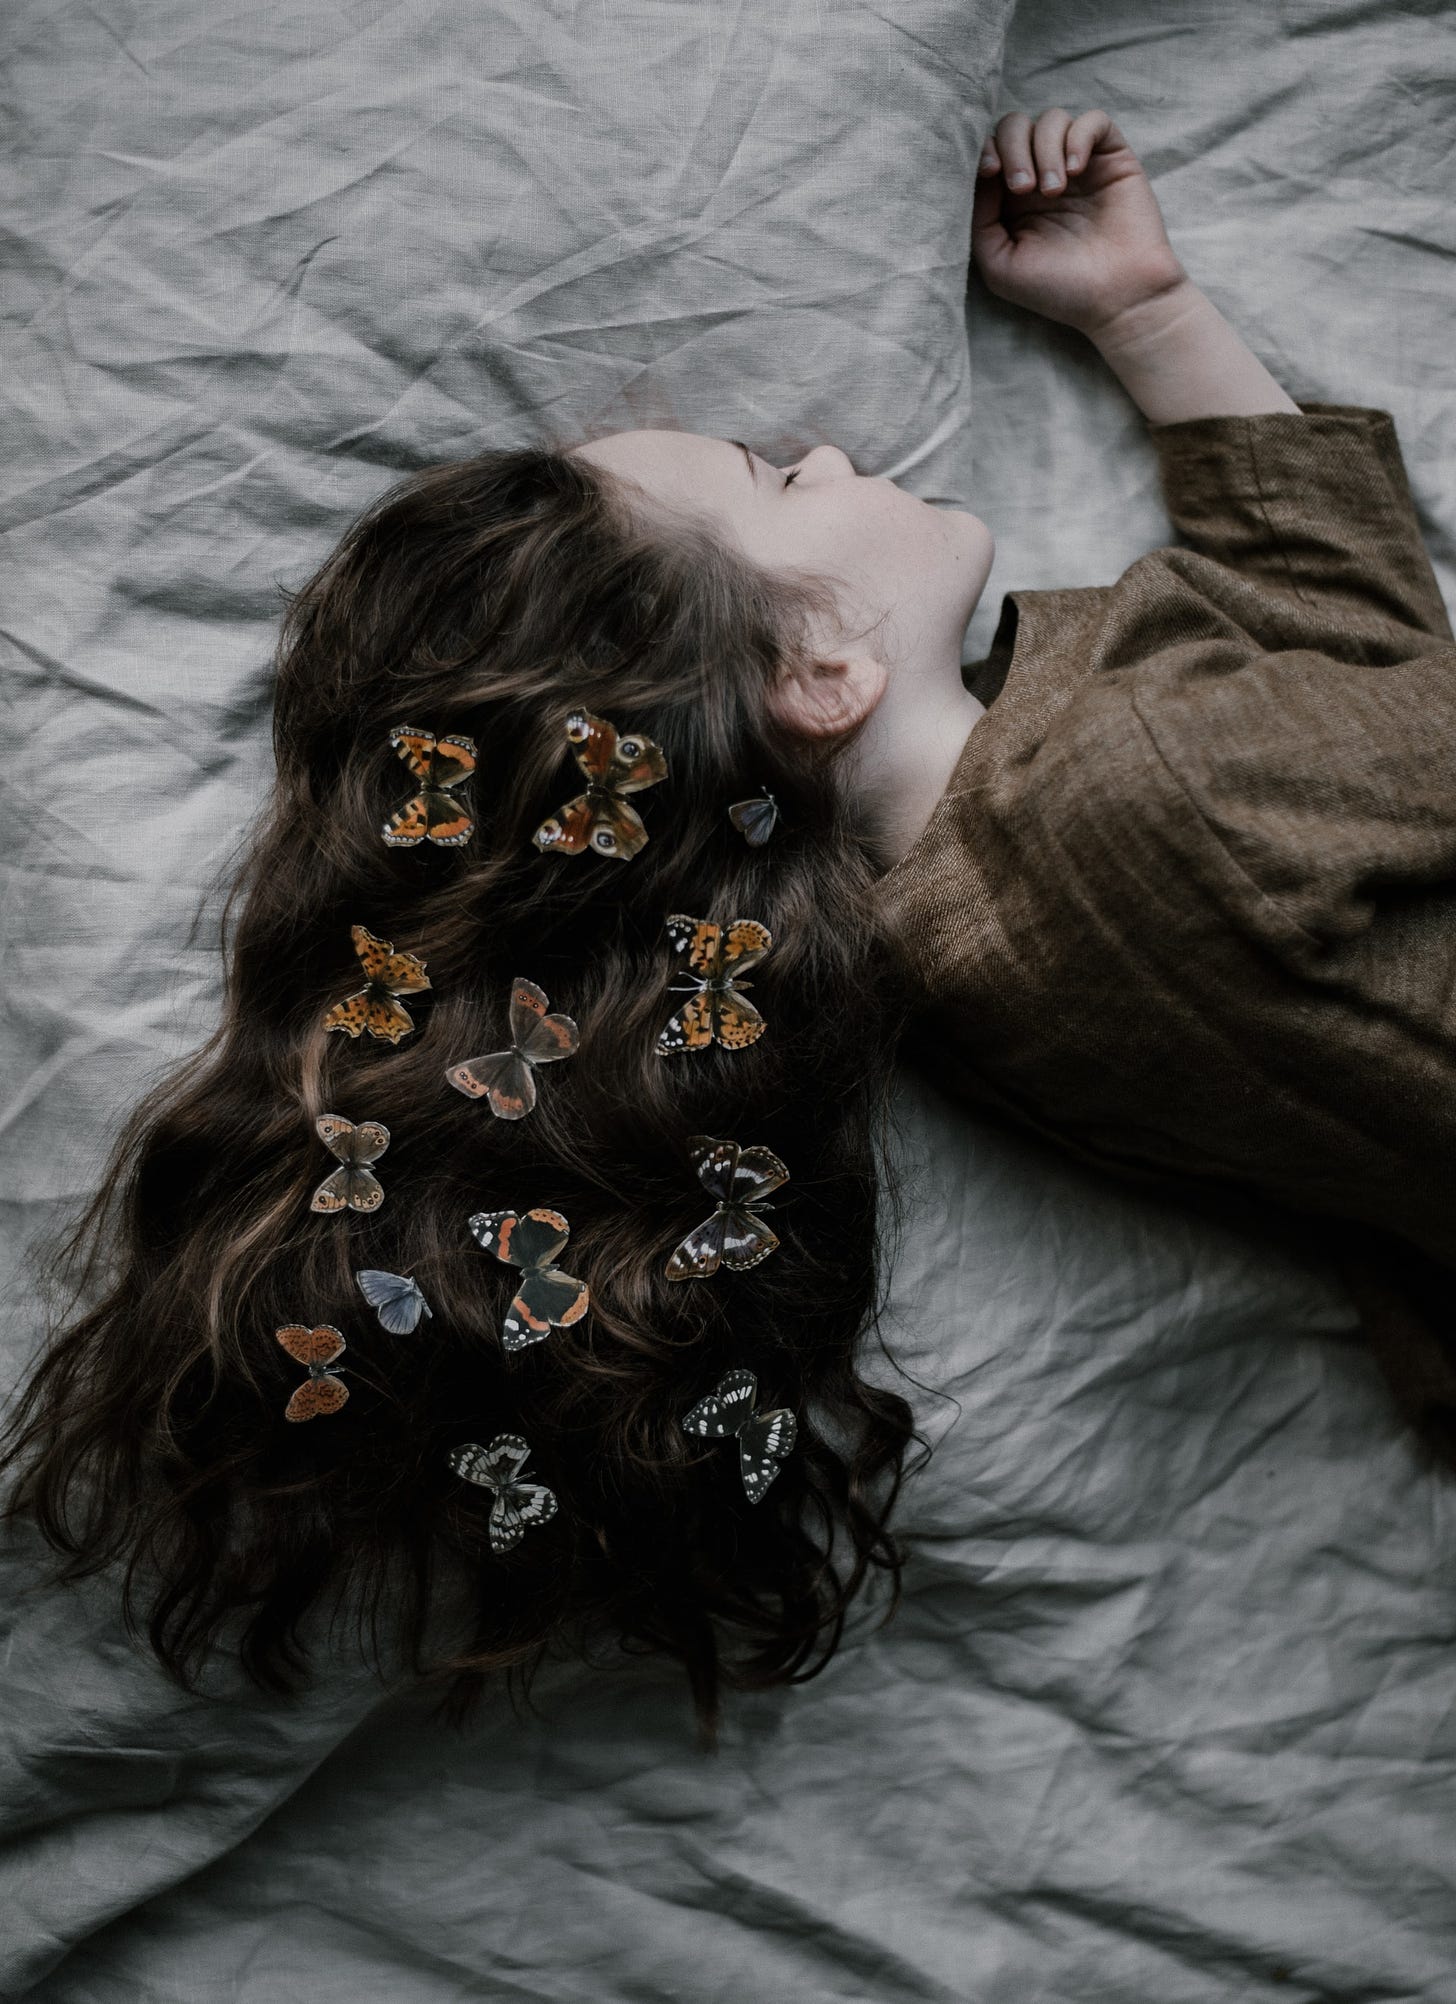 Young girl, laying to the side on a gray blanket. She's asleep, her long dark hair lays spread out behind her. Rows of butterflies of various shade and colors are attached to her hair. She wears a brown dress.